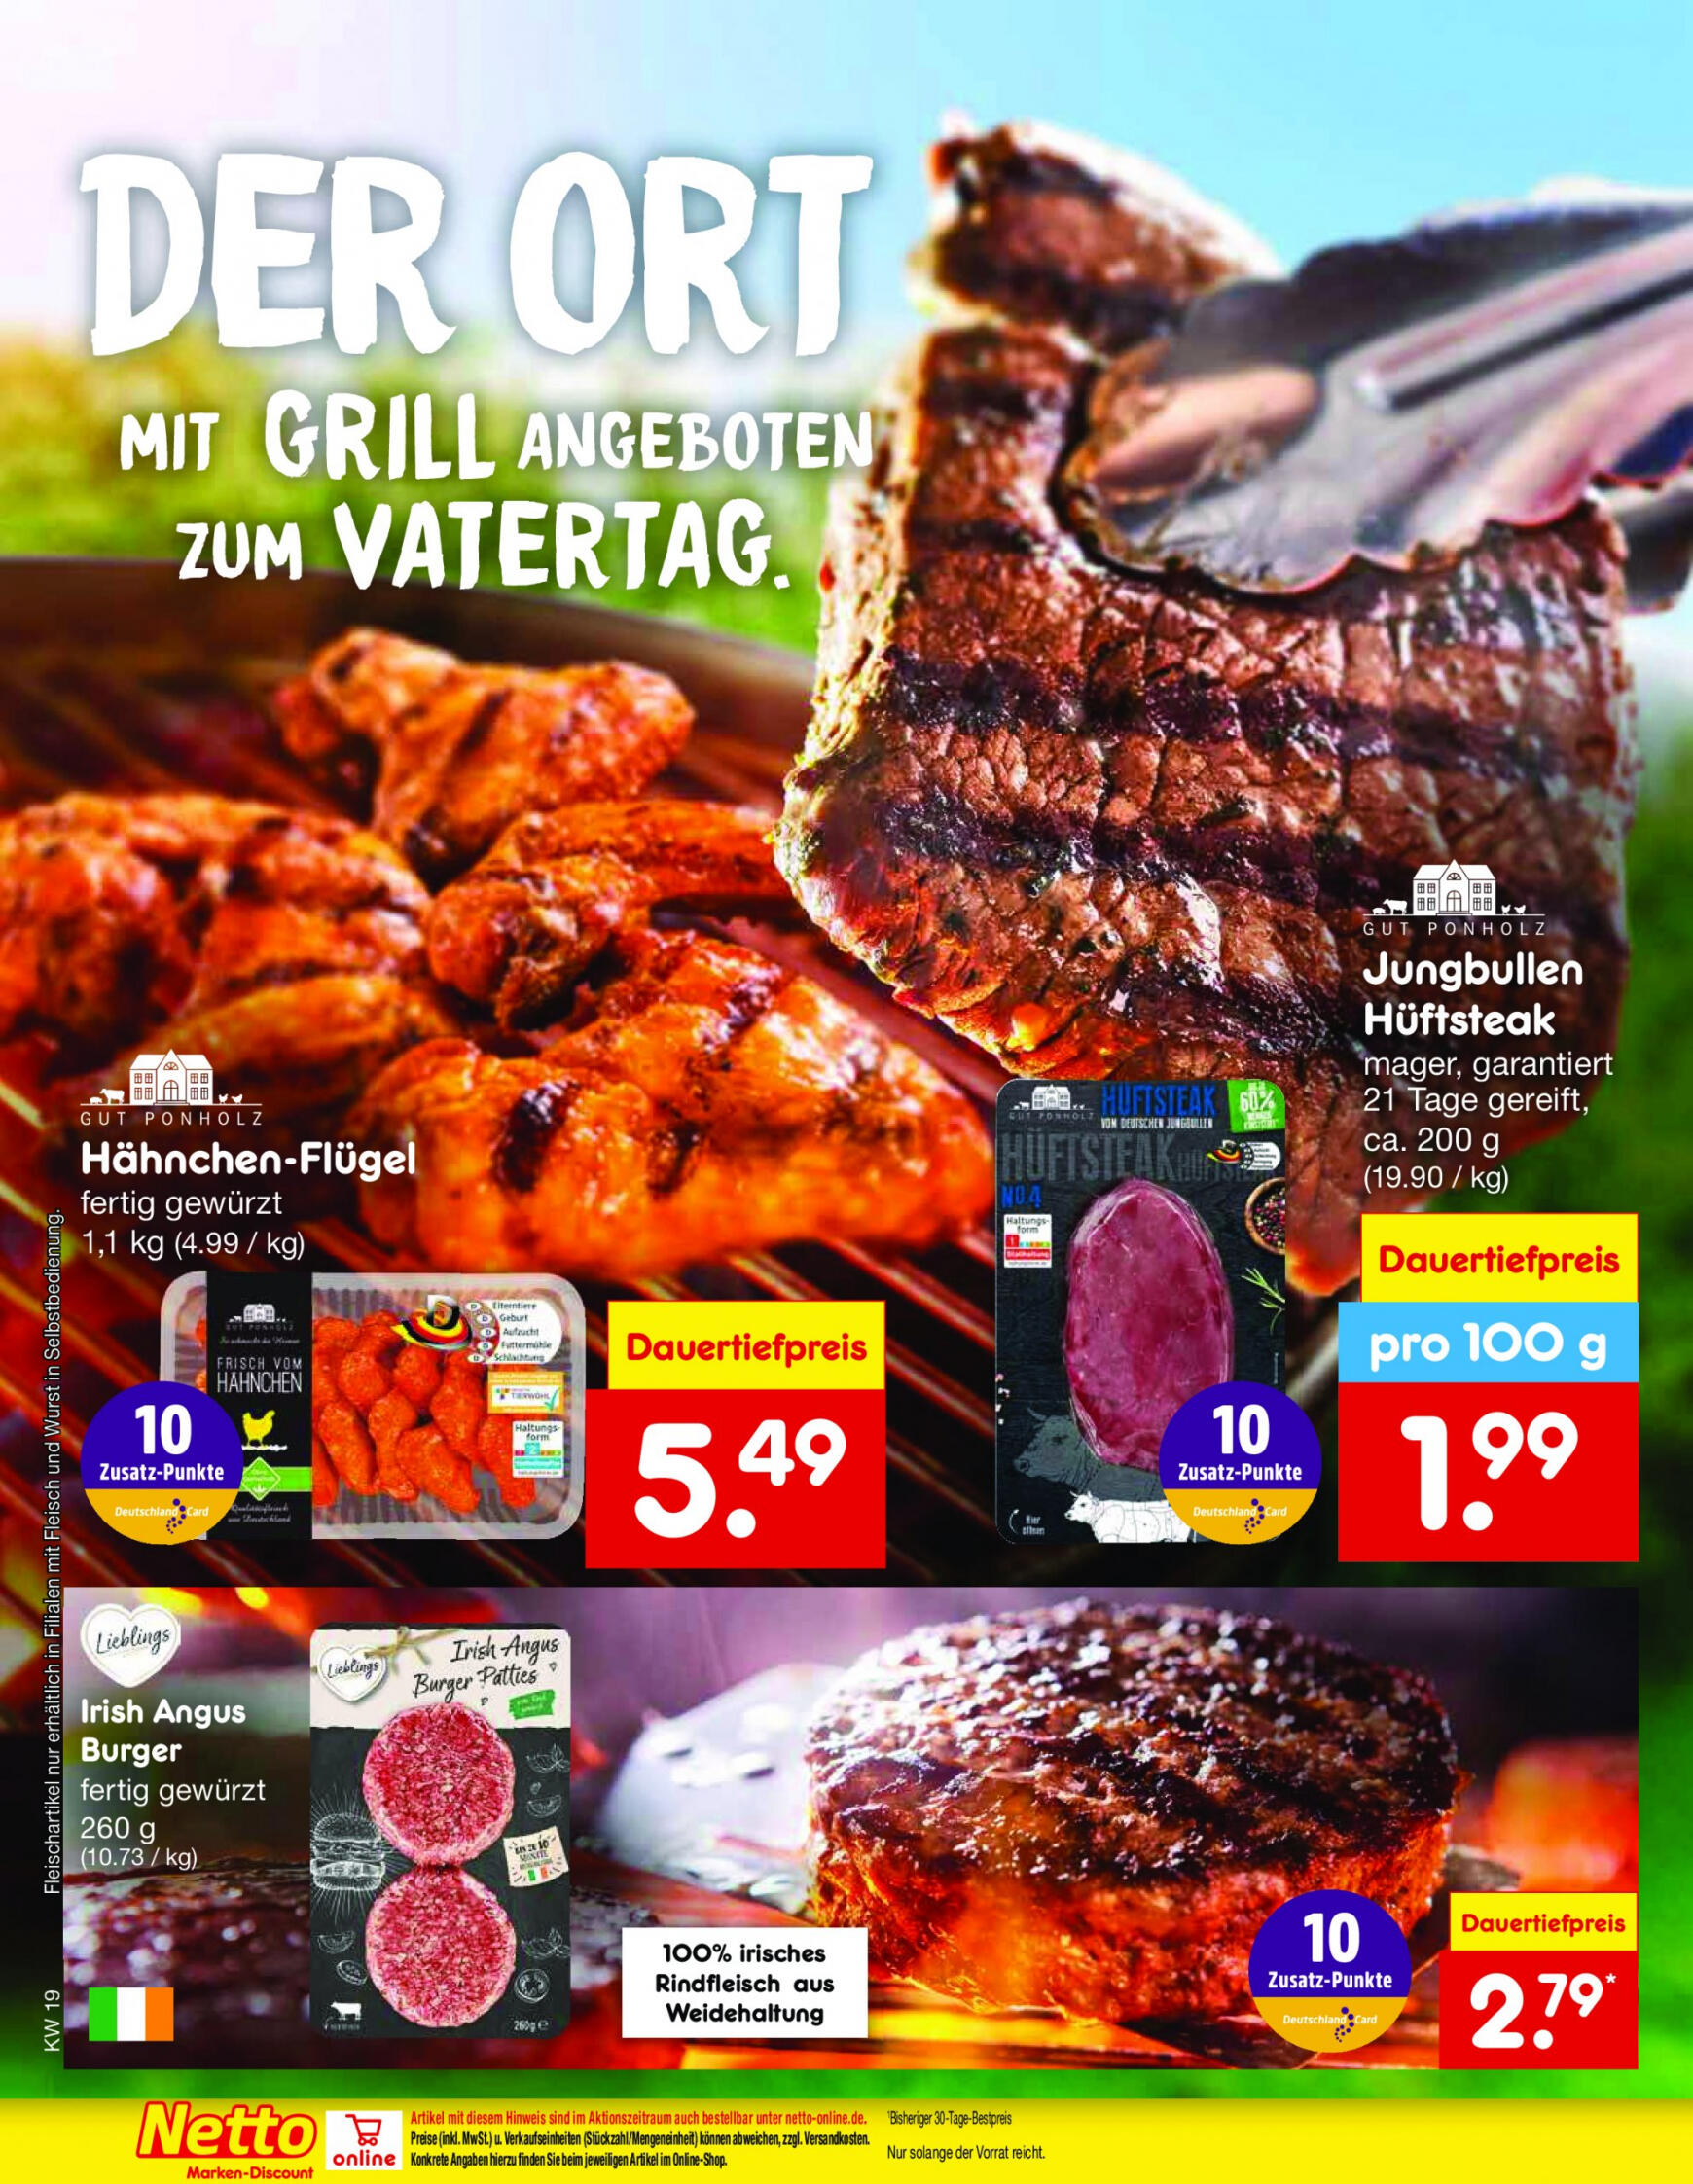 netto - Flyer Netto aktuell 06.05. - 11.05. - page: 16